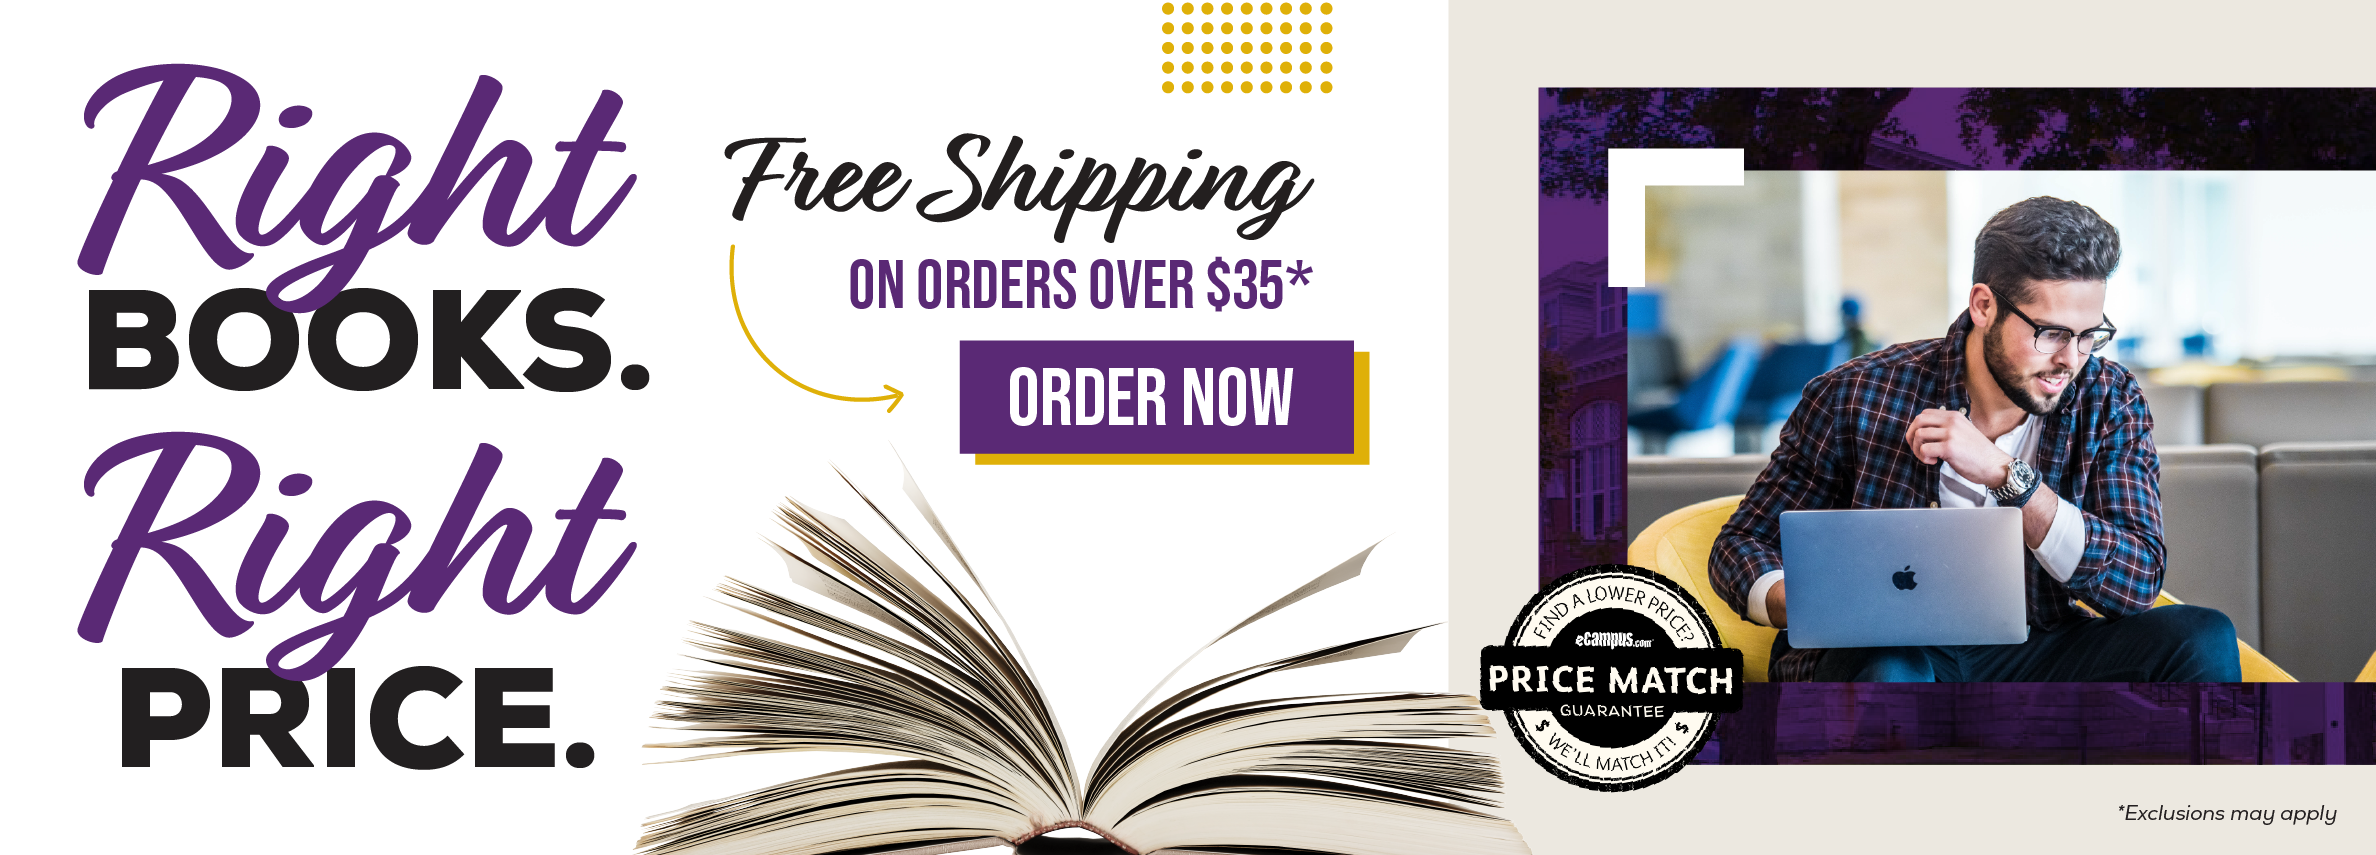 Right books. Right price. Free shipping to the Hood Gear Shop.* Order now. Price Match Guarantee. *Exclusions may apply.